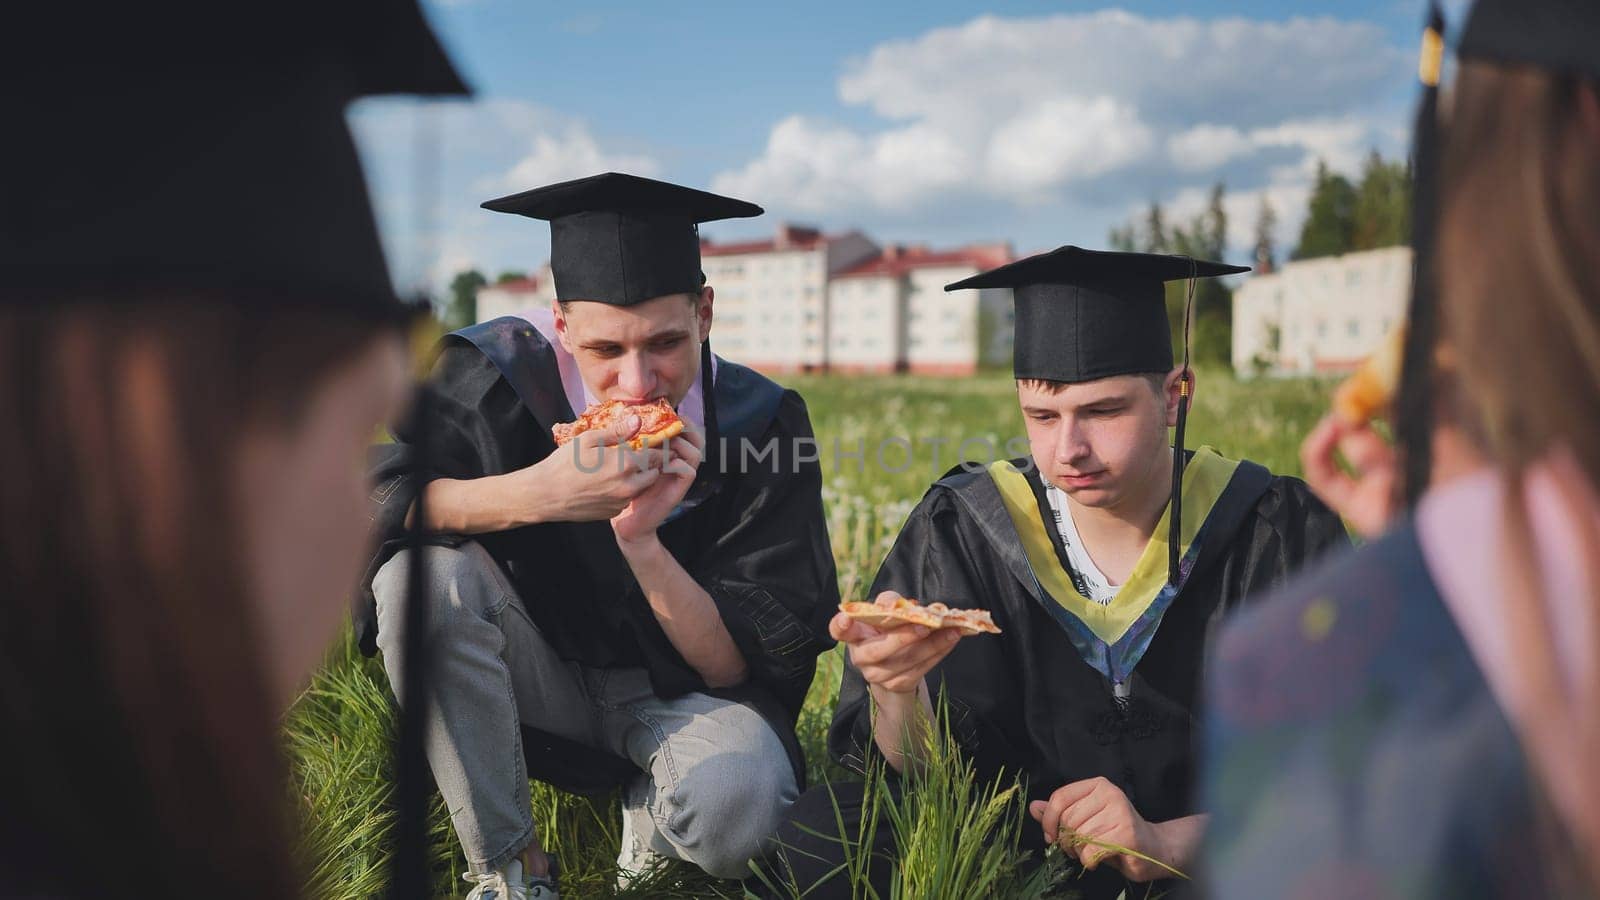 Graduates in black suits eating pizza in a city meadow. by DovidPro